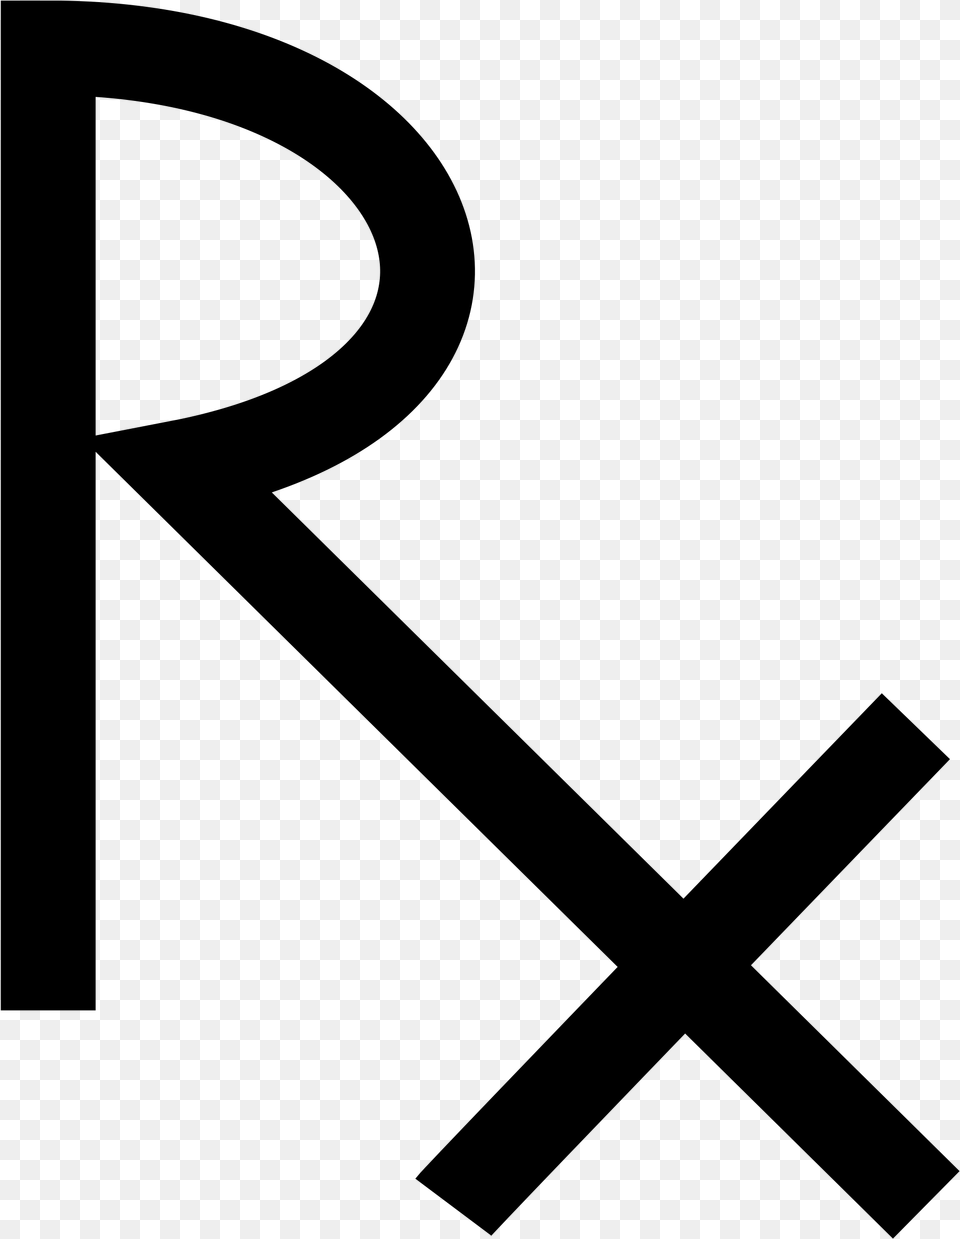 This Free Icons Design Of Prescription Symbol, Gray Png Image